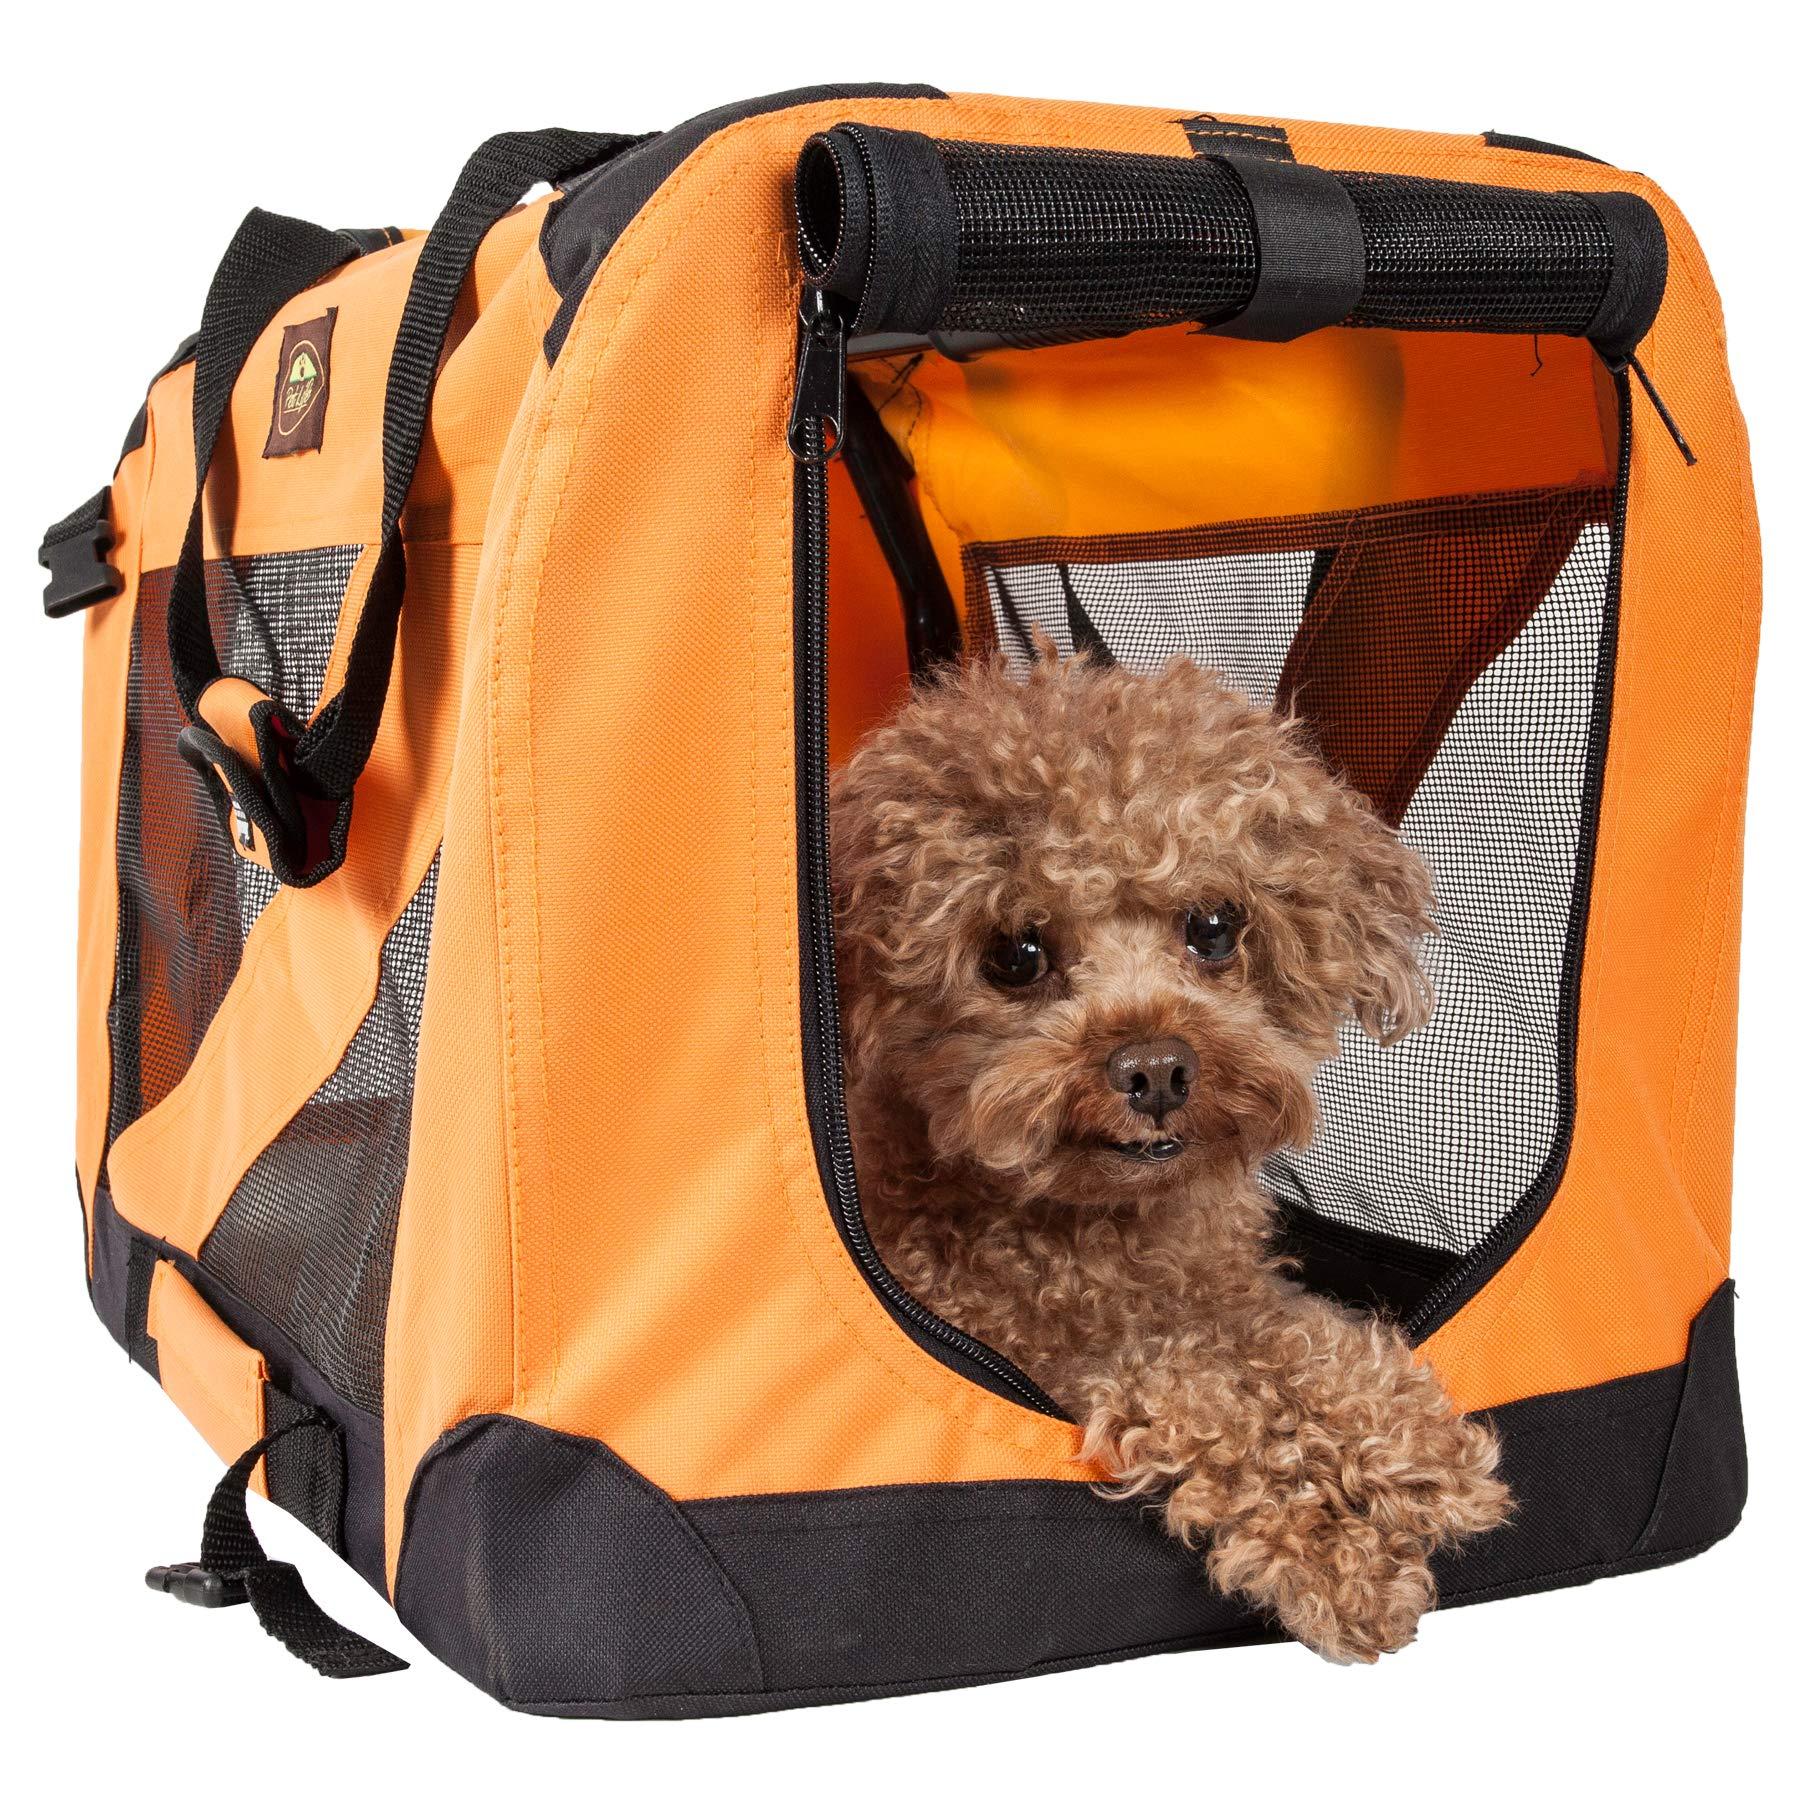 PET LIFE 360A Vista View Zippered Soft Folding collapsible Durable Metal Framed Pet Dog crate House carrier X-Small Orange